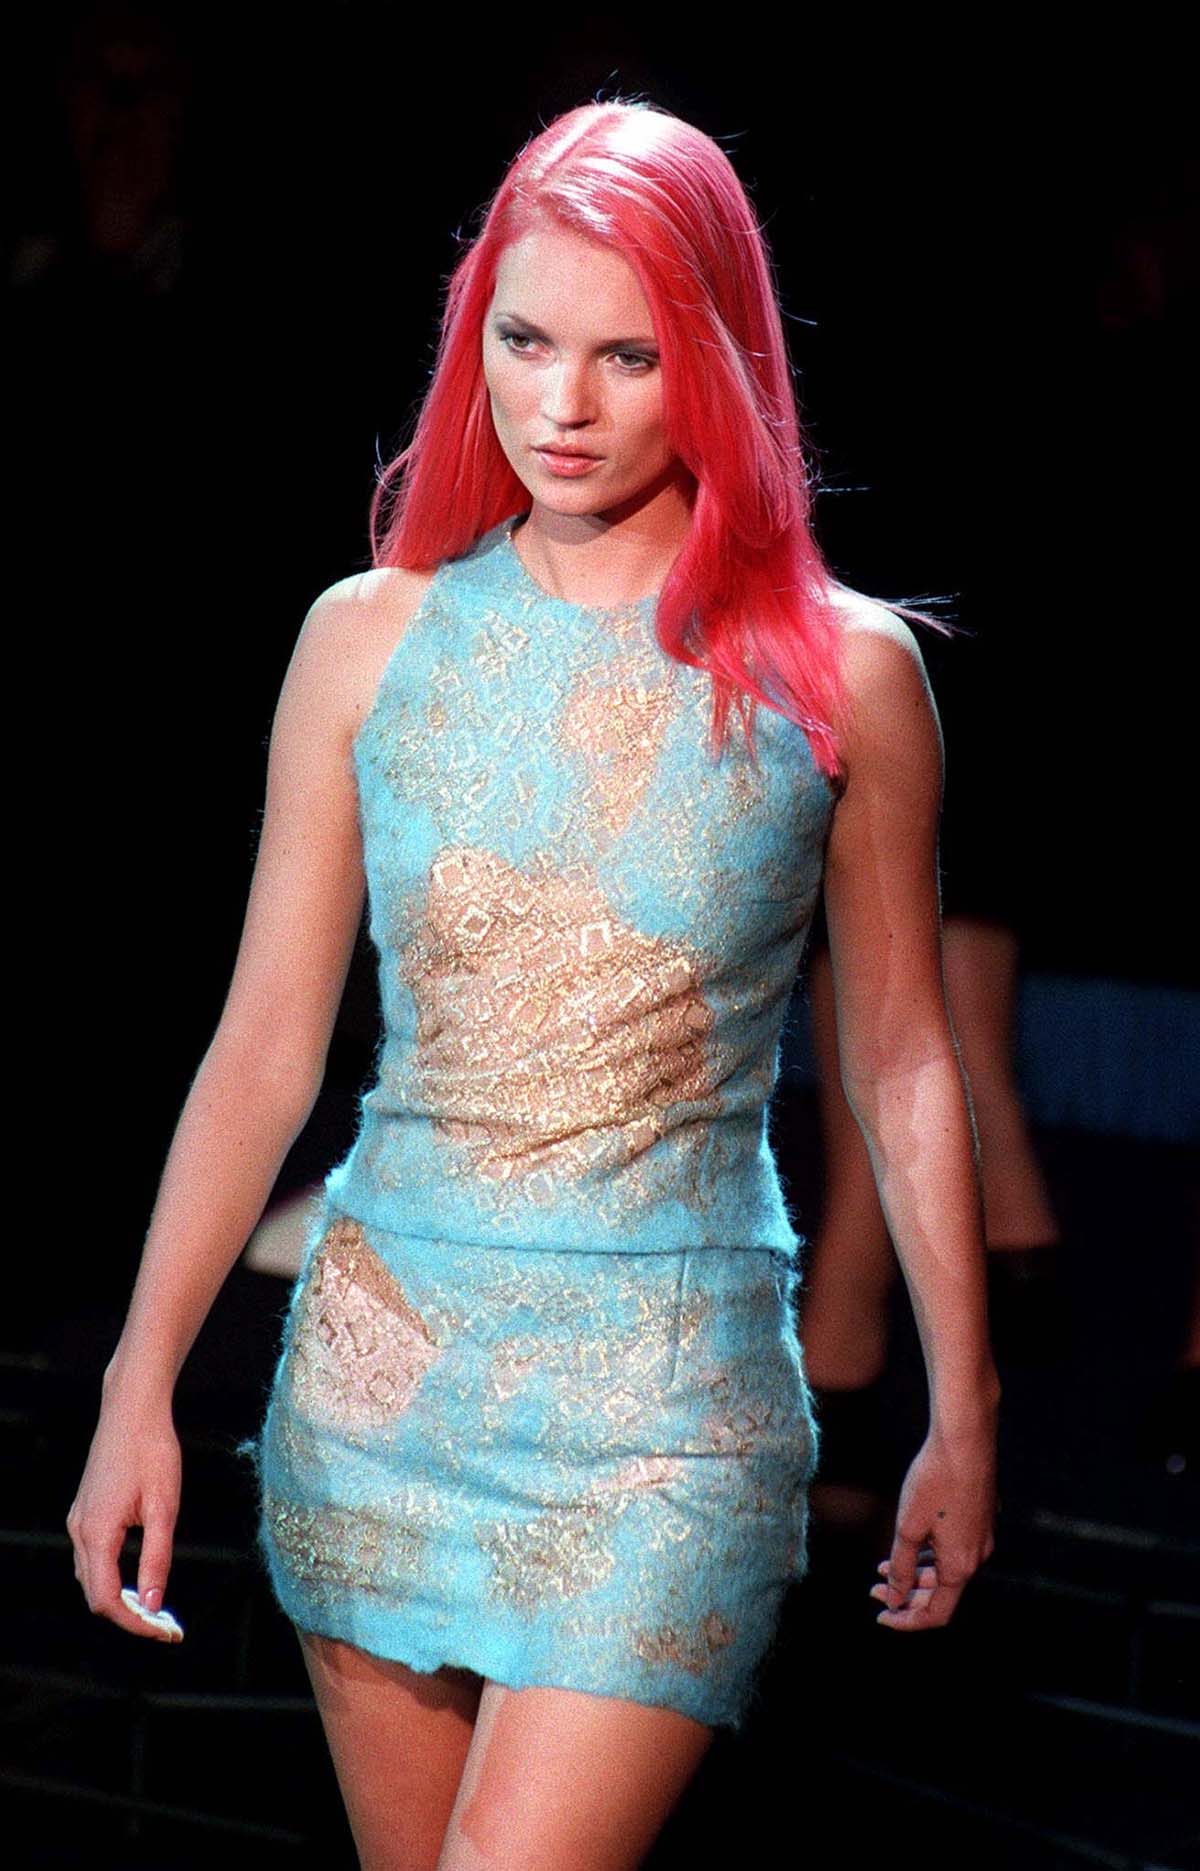 Kate Moss returns to her '90s pink hair in Marc Jacobs campaign